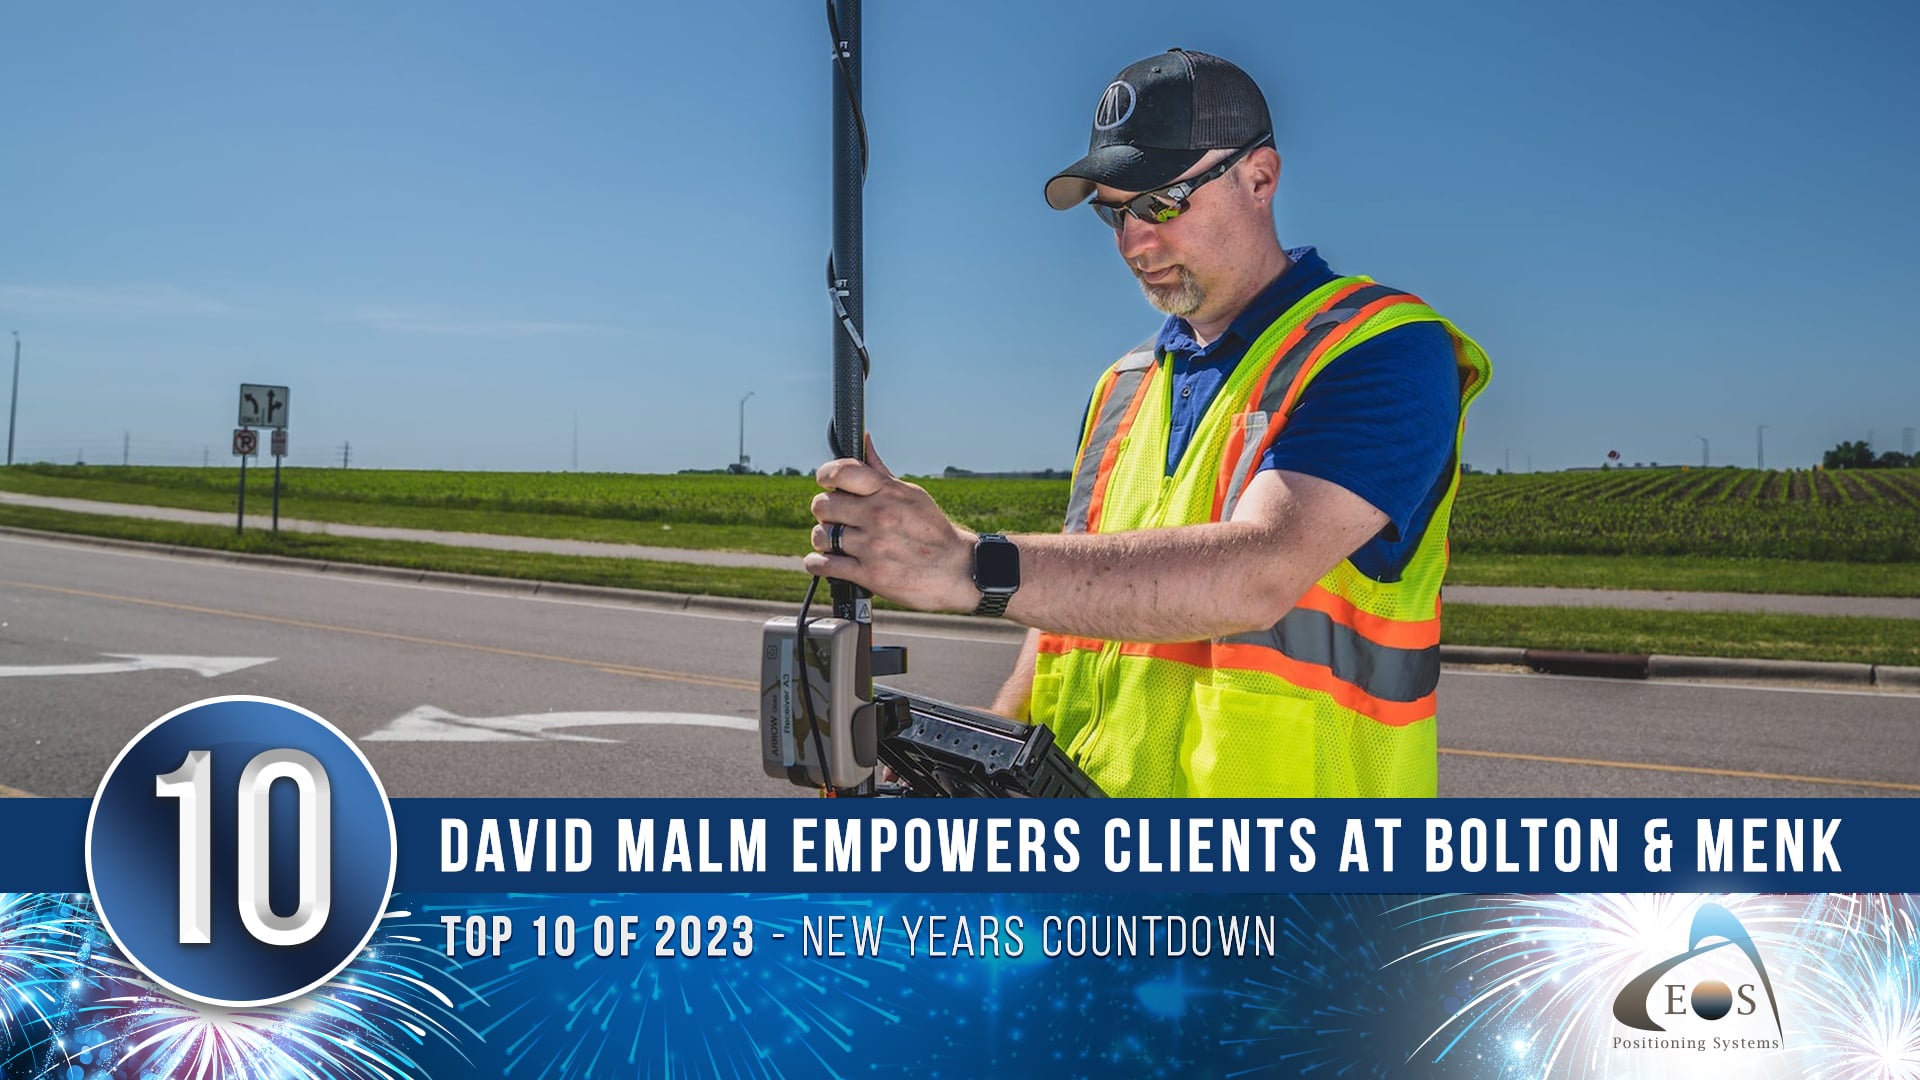 10 - David Malm Empower Clients at Bolton & Menk Top 10 of 2023